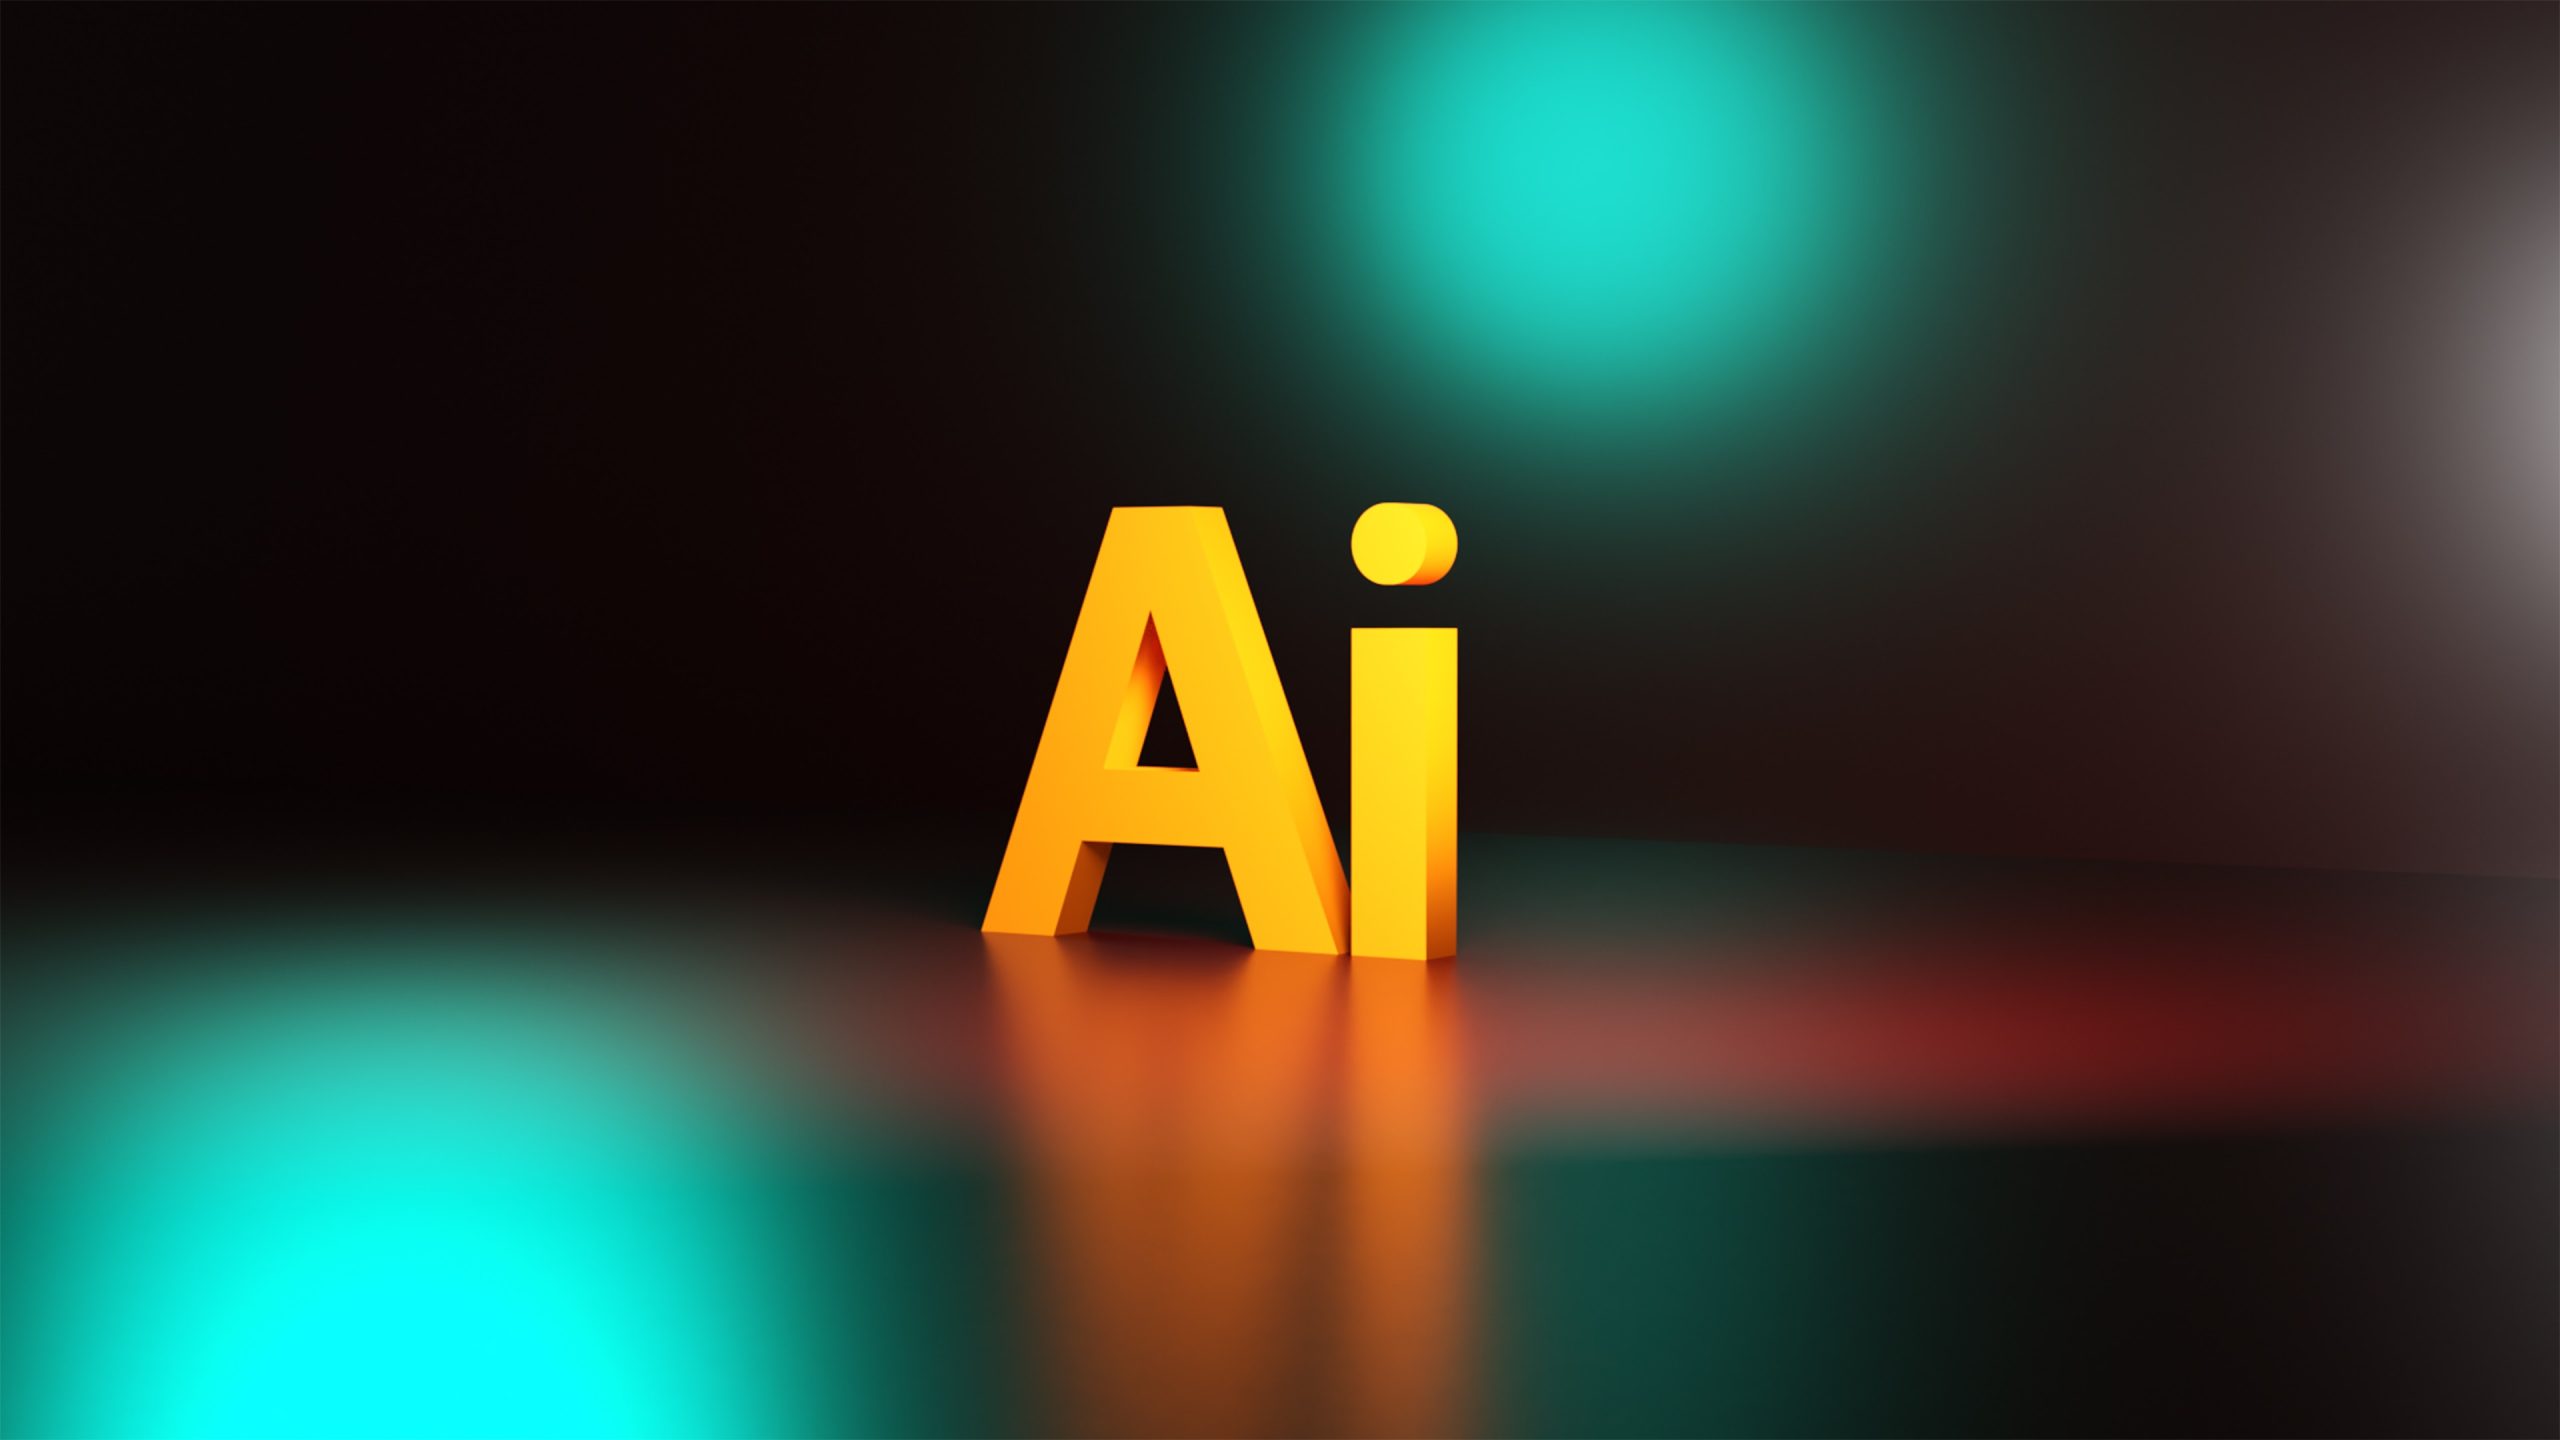 Colourful graphic with the word 'Ai'.